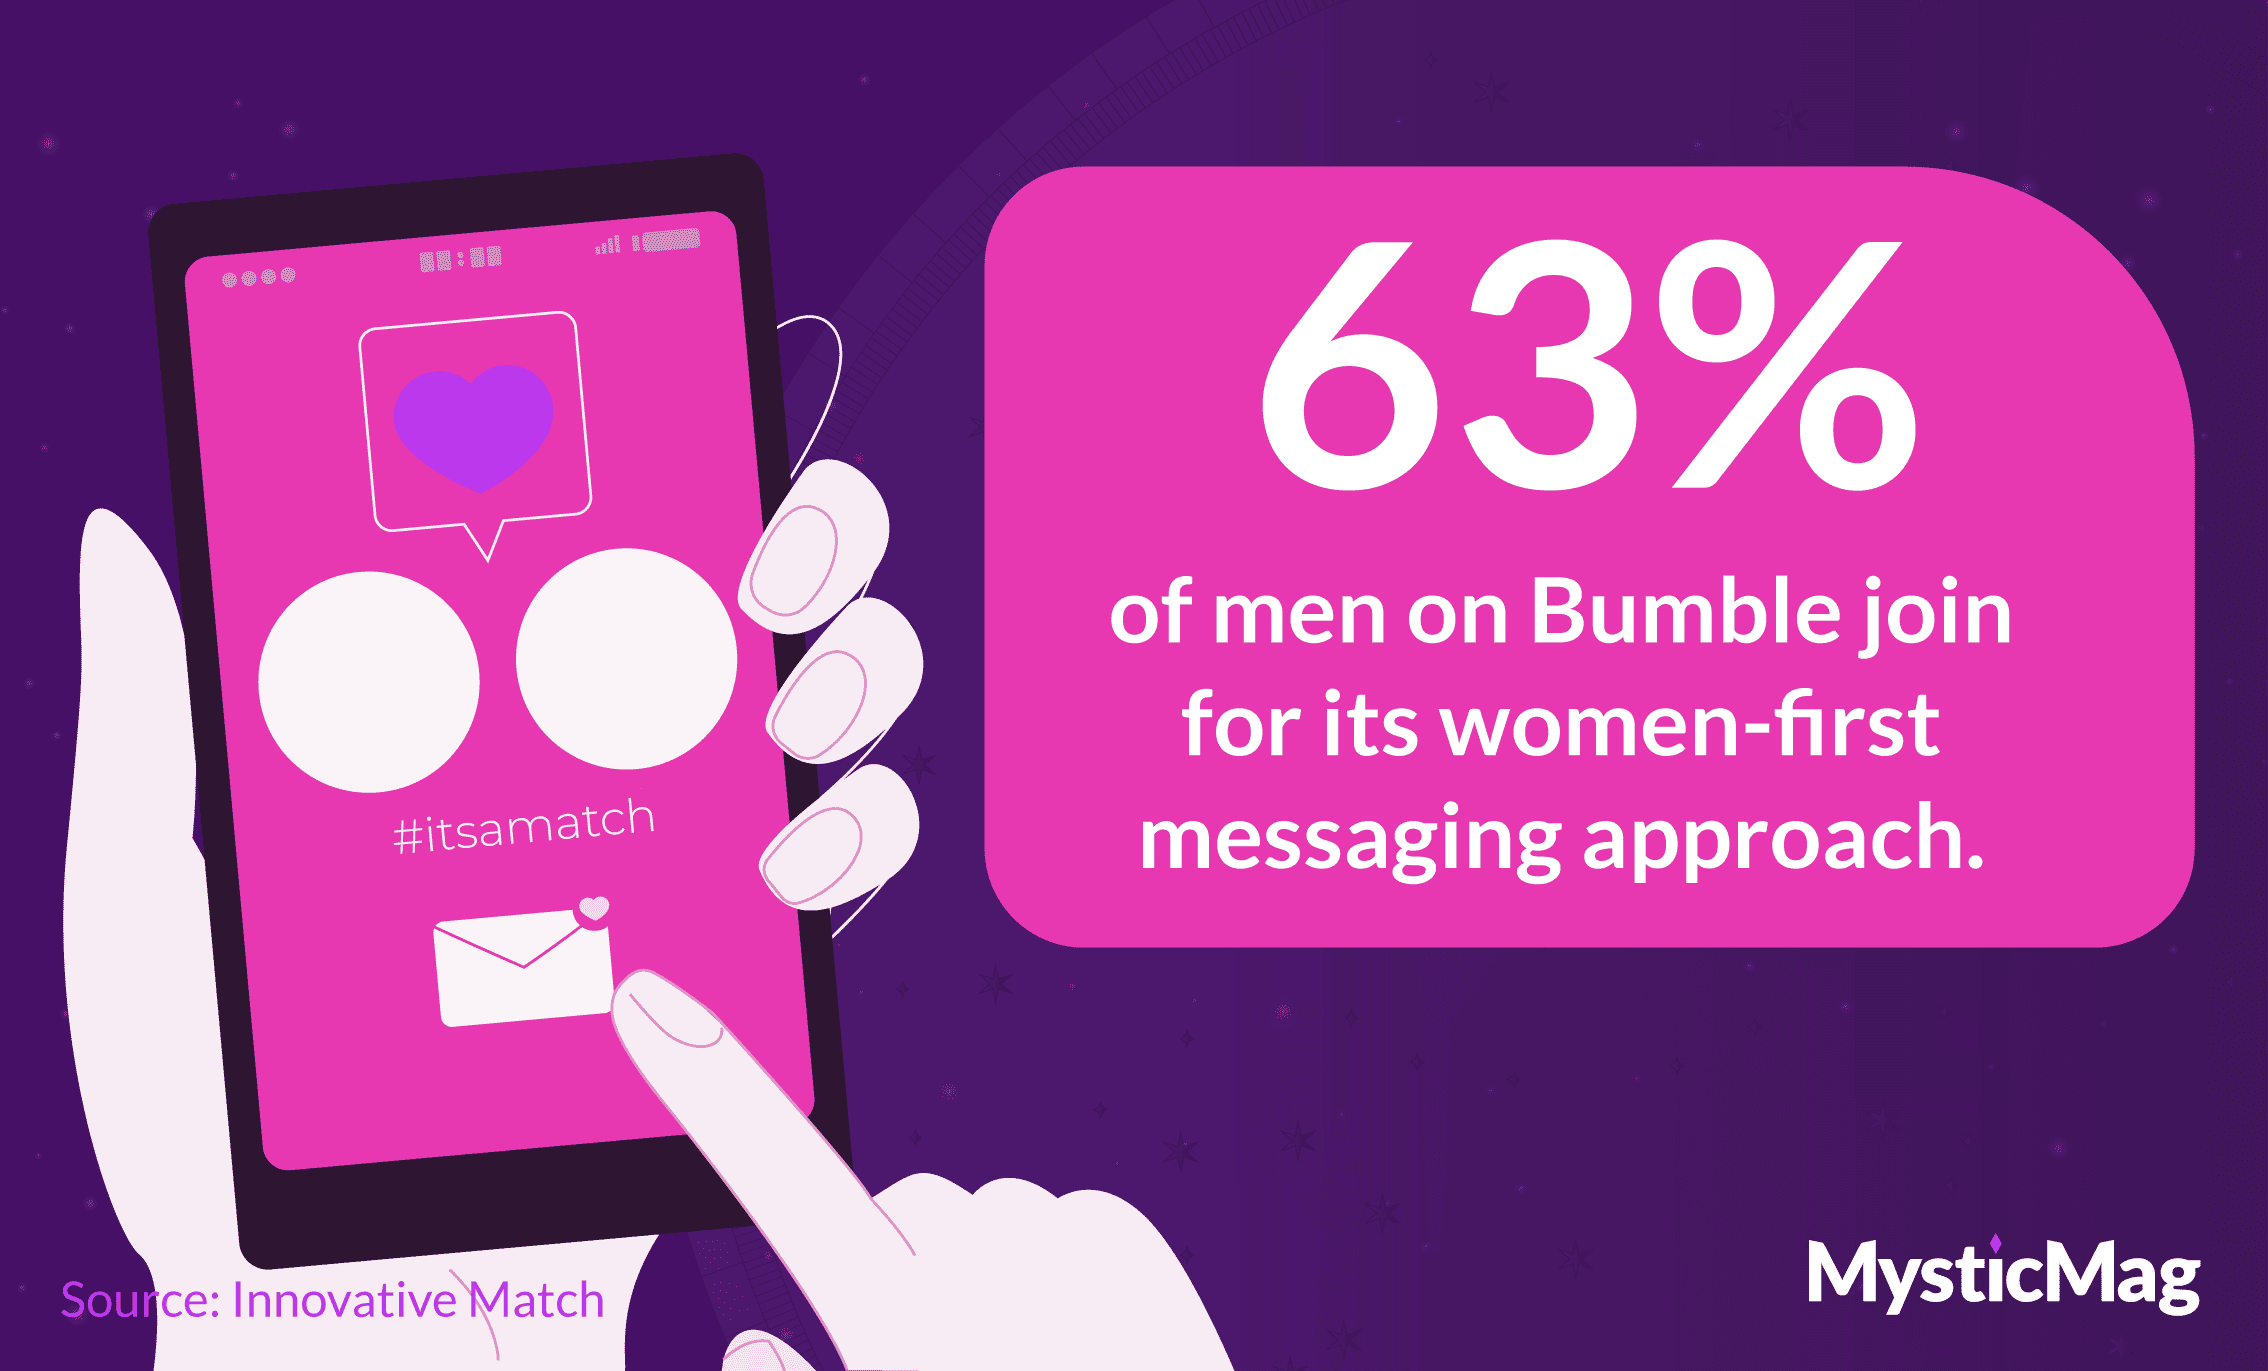 63% of men on Bumble join for its women-first messaging